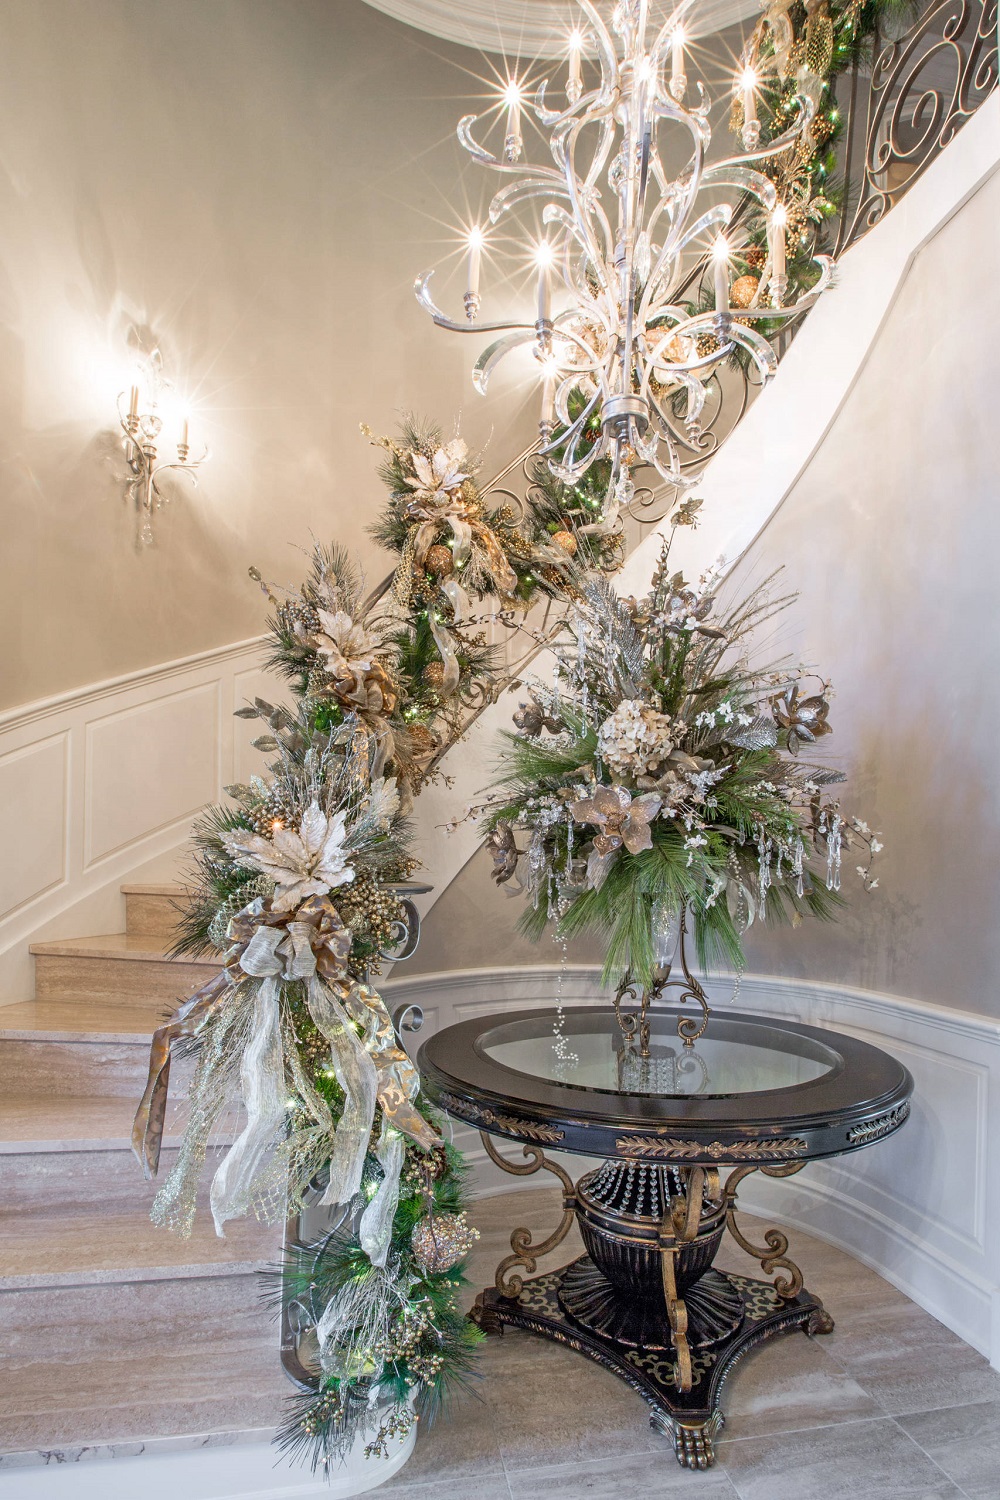 t3-159 Awesome Christmas staircase decorating ideas you should absolutely try